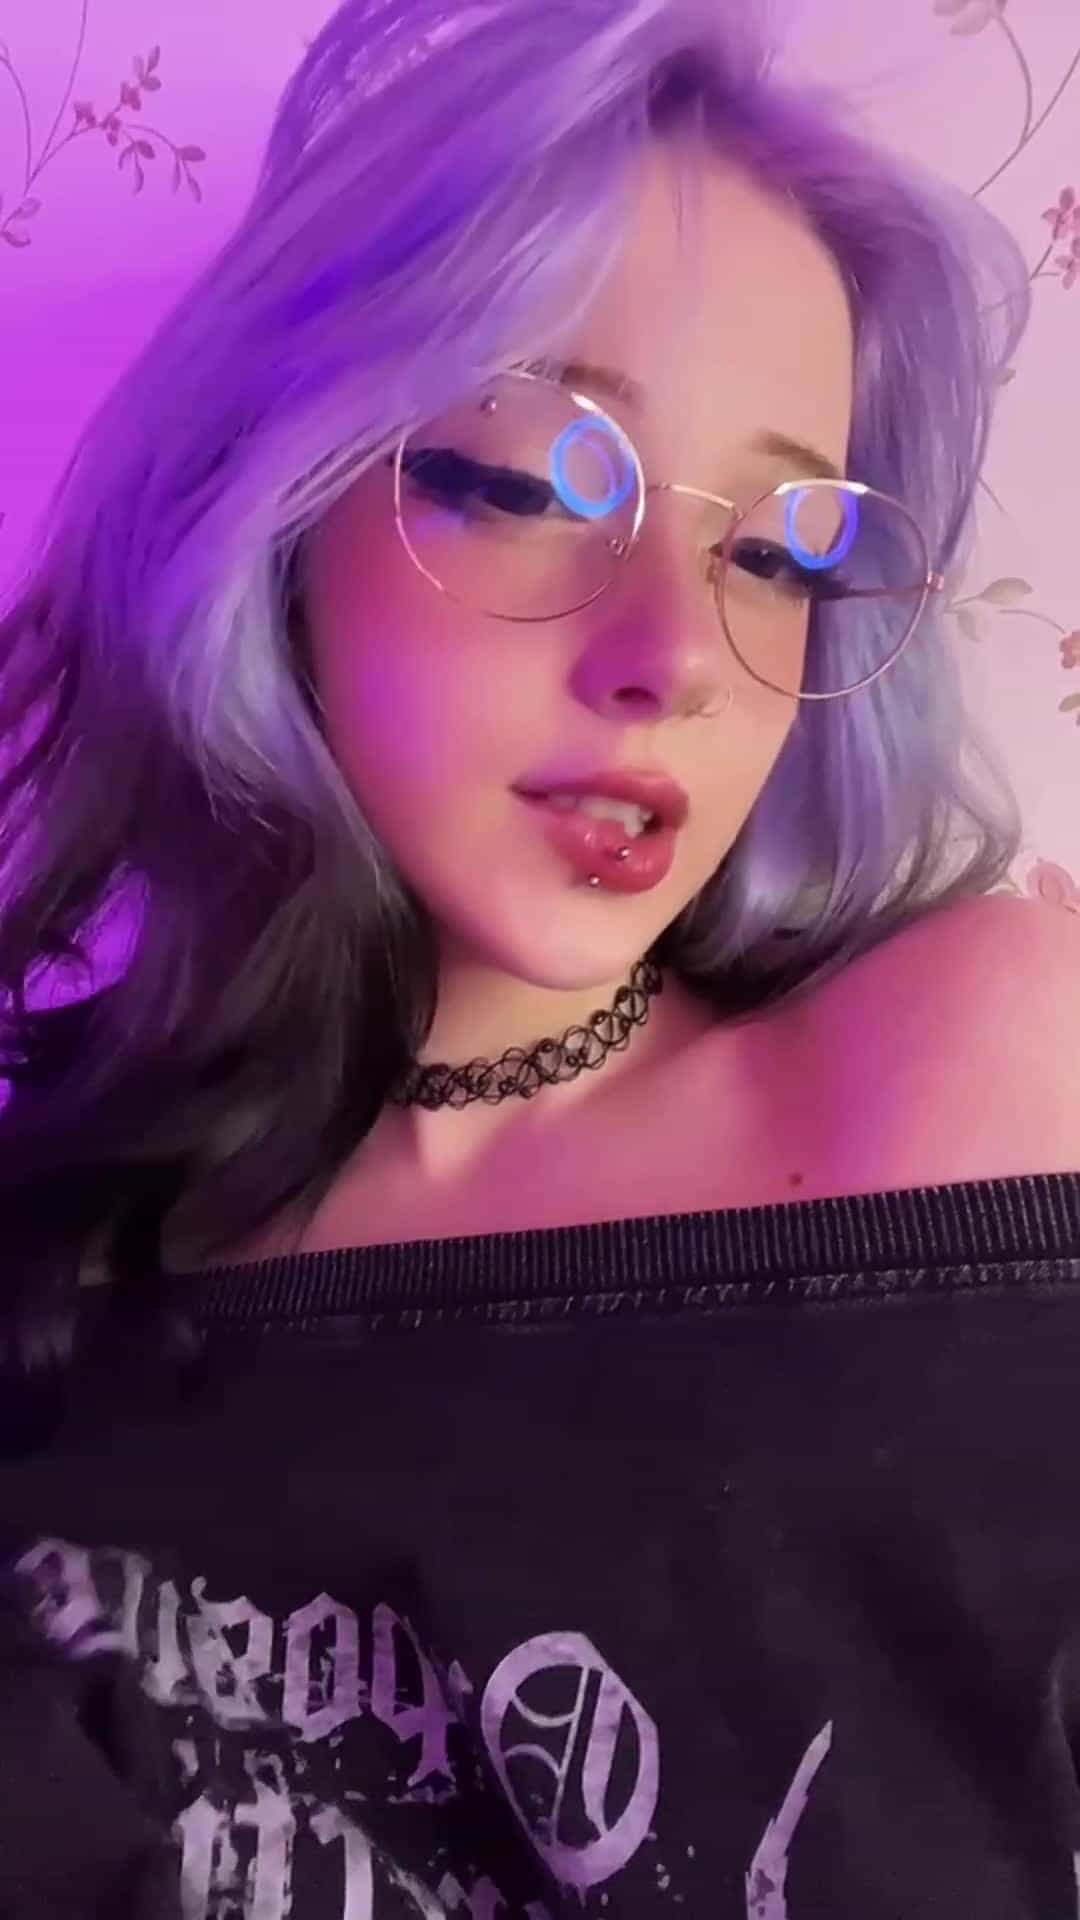 Can my glasses stay on when u fuck my mouth? I wanna see your face clearly when u use me~